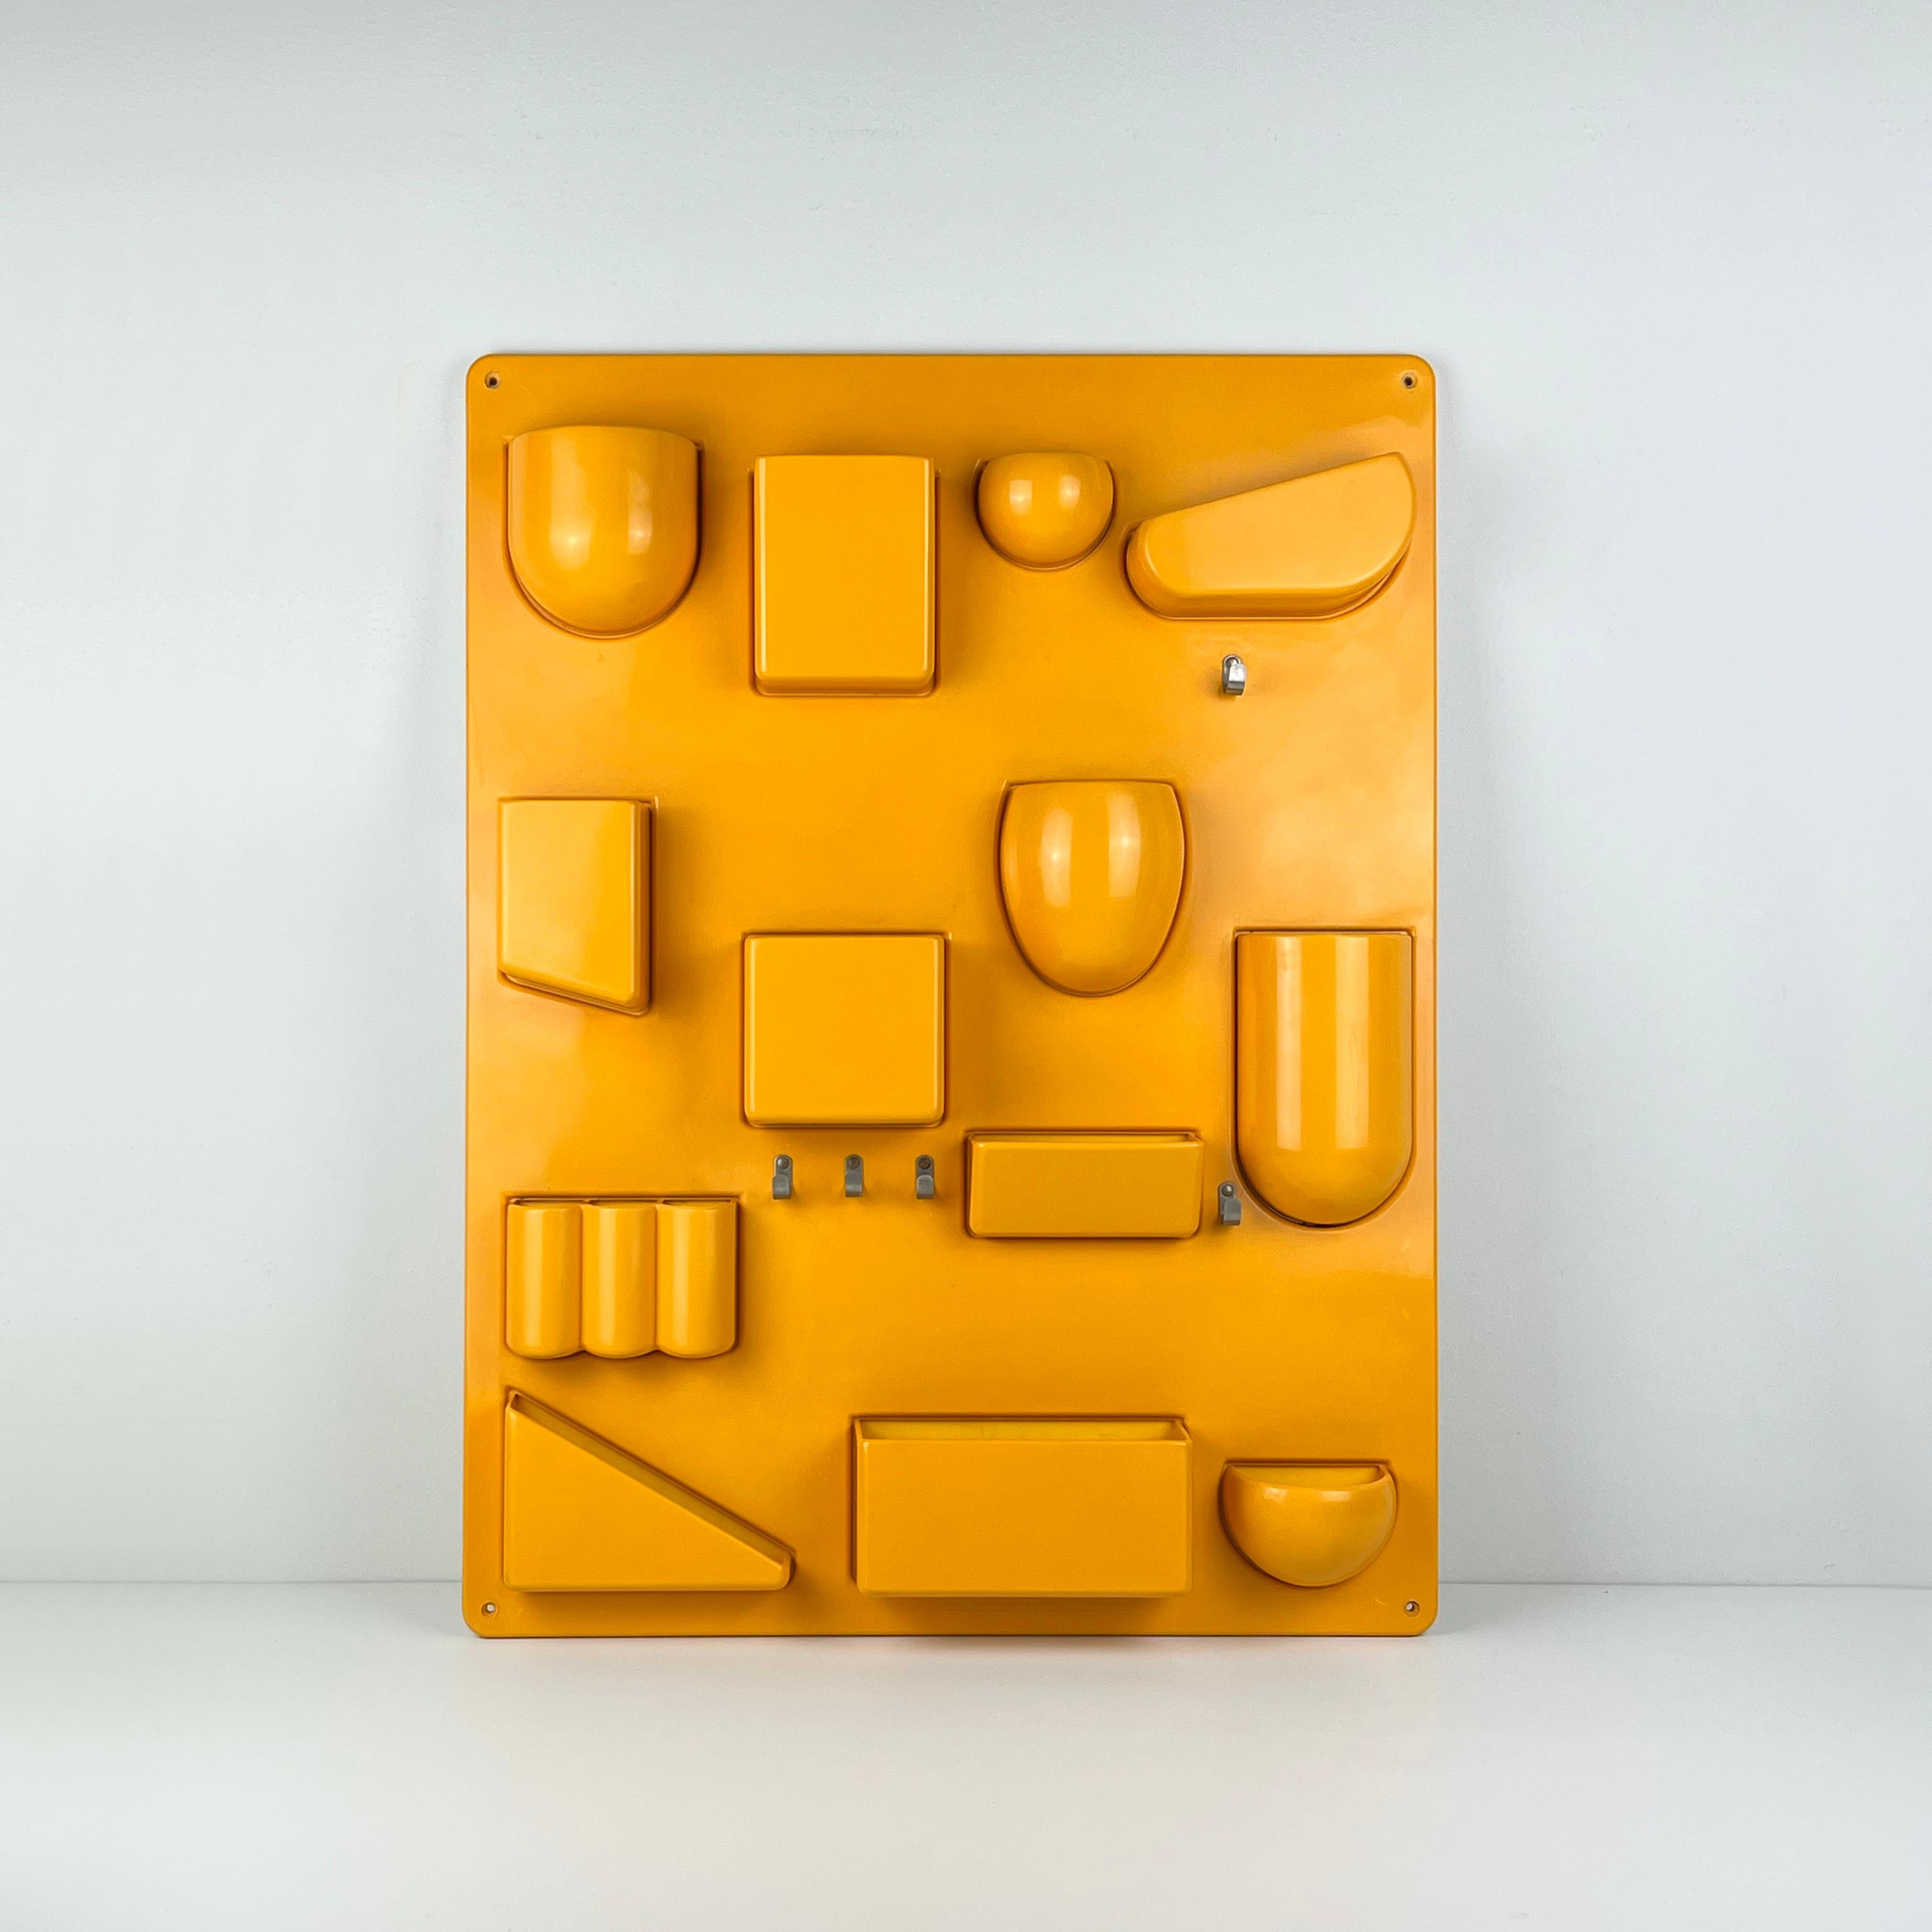 Yellow “Utensilo” Plastic Wall Storage Unit designed by Dorothee Maurer Becker for Design M, Germany, 1970s

This wonderful organizer can be surpridingly useful; whether it's your bustling kitchen, inspiring office, eclectic art studio, refreshing